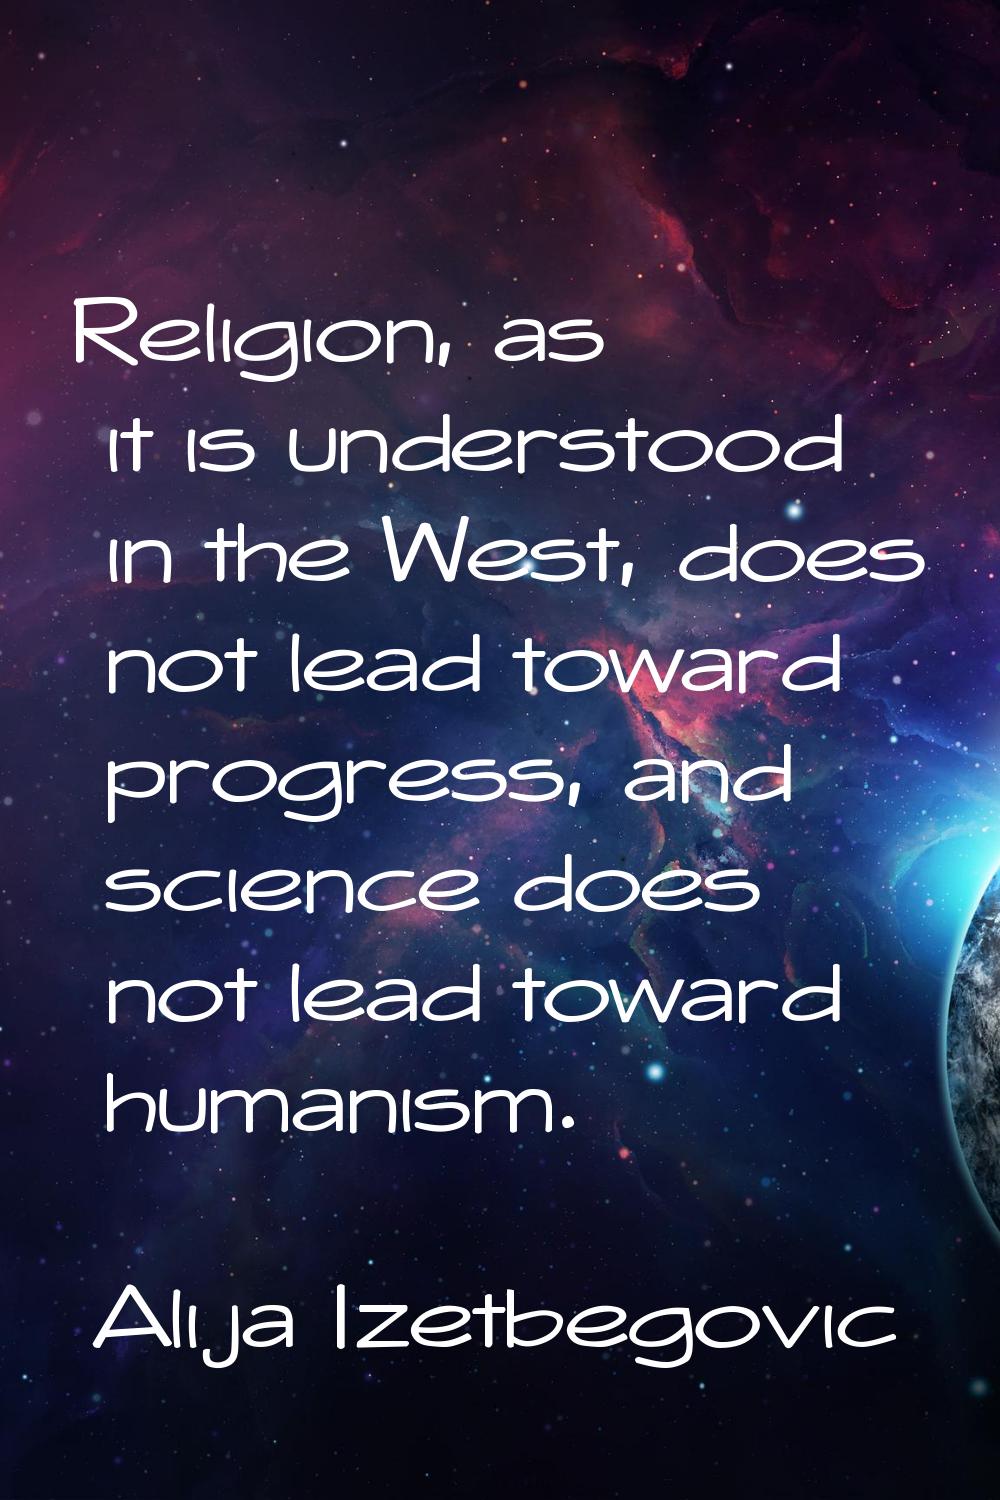 Religion, as it is understood in the West, does not lead toward progress, and science does not lead